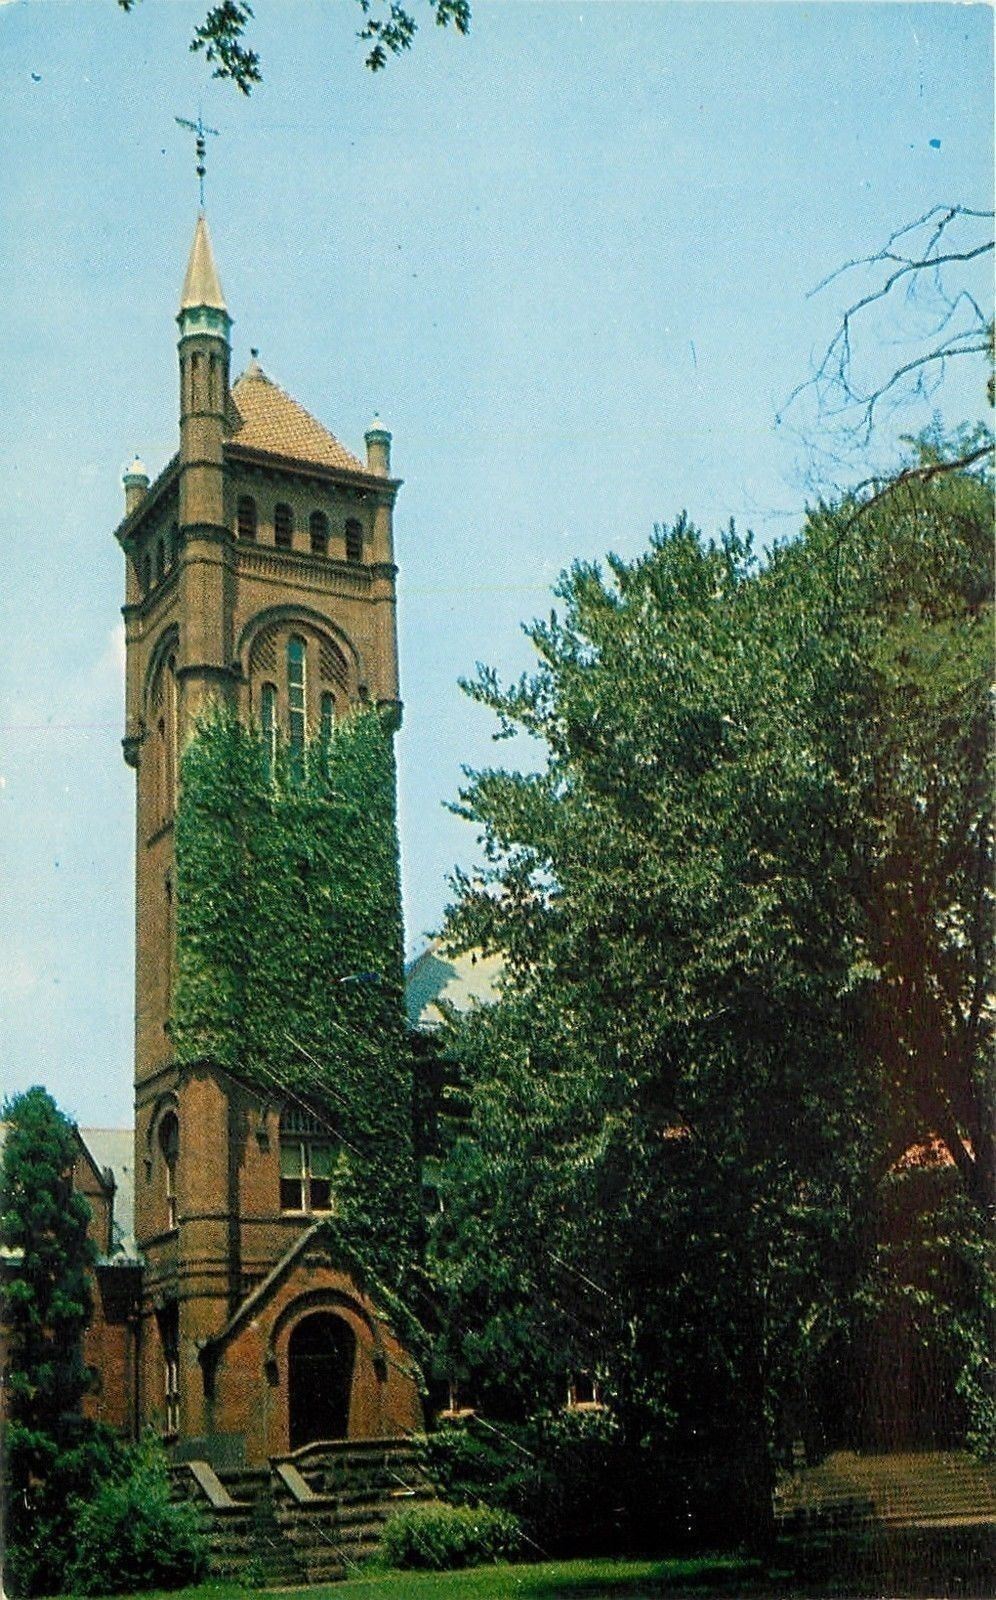 Lancaster Pennsylvania 1/3 of Tower Covered in Ivy~Theological Seminary 1950s